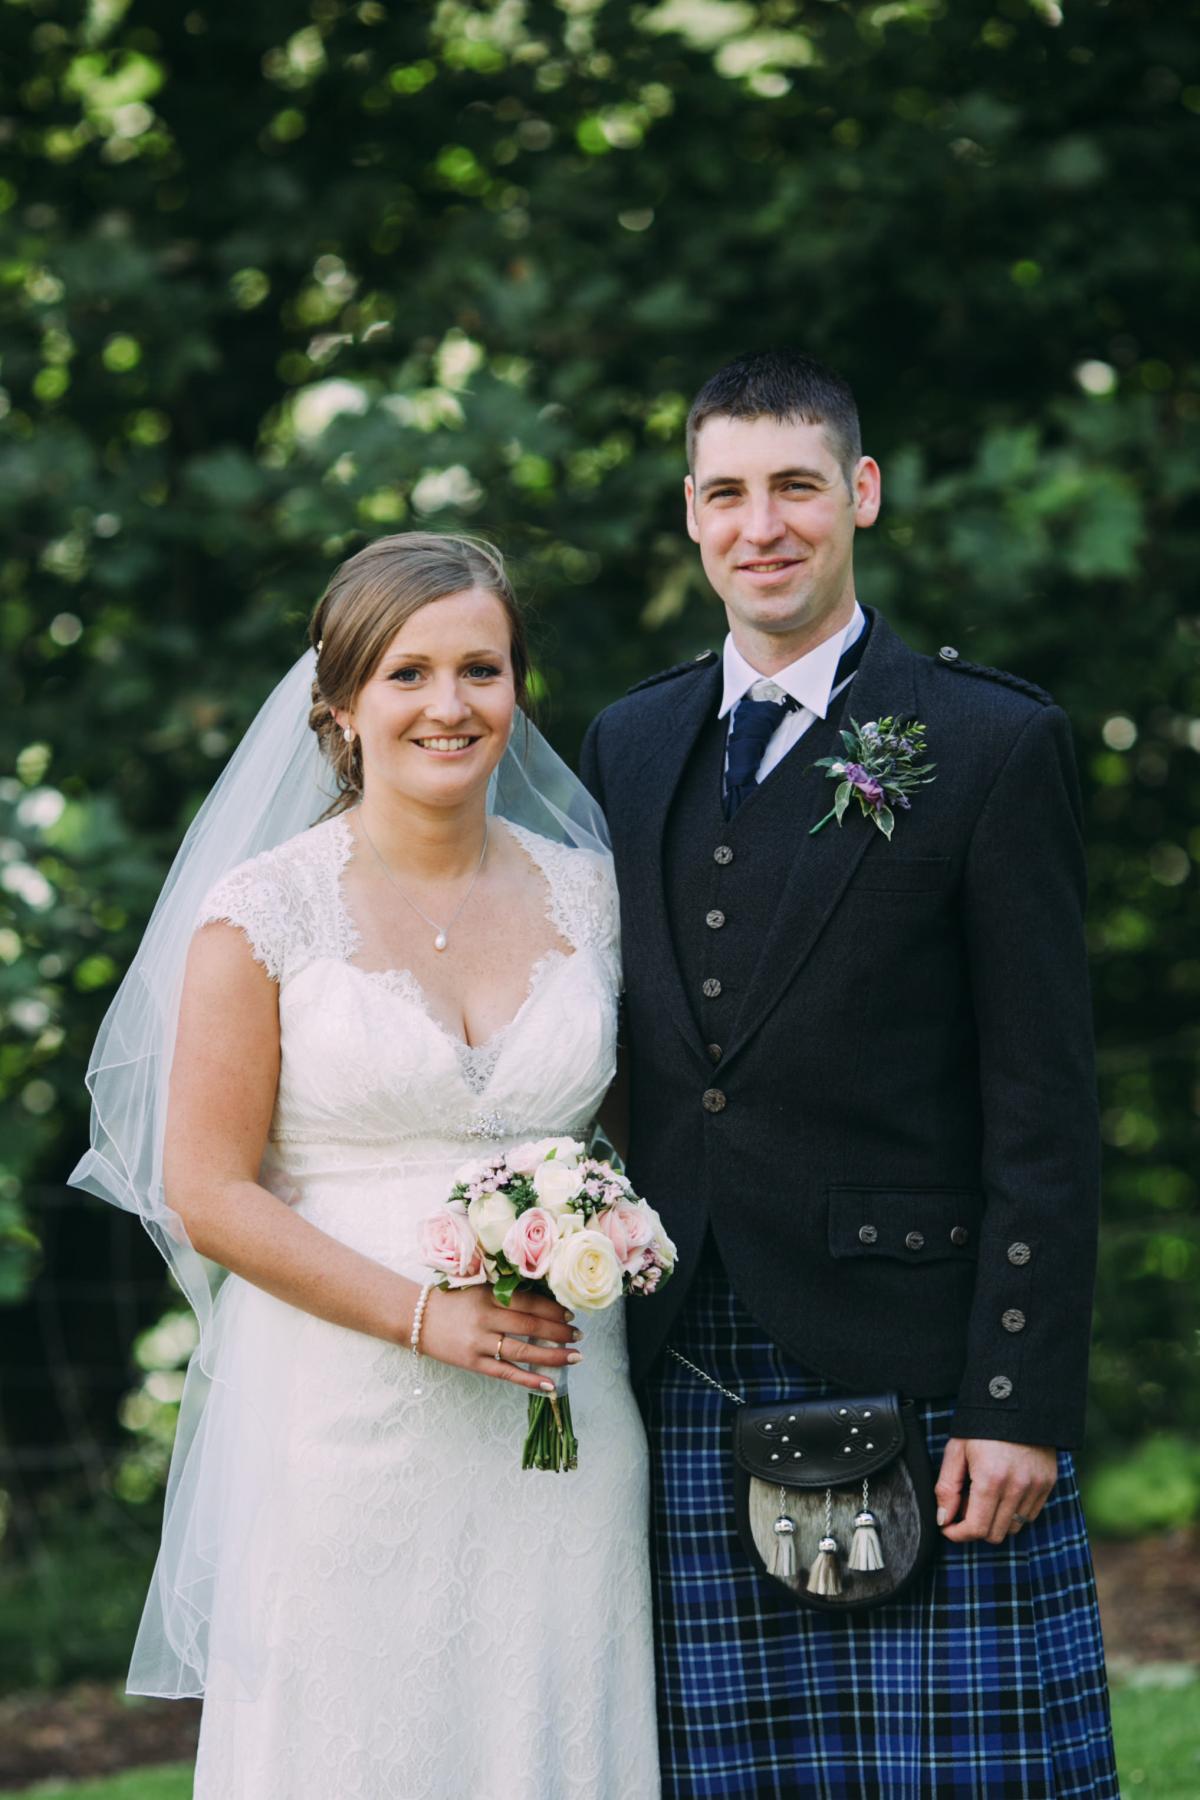 Kerry Barr, East Kinleith Farm, Currie, married Ian Clark, Westmuir Farm, West Calder, at Currie Kirk, followed by a reception at the Dalmahoy Hotel
Photo is by Eilidh Robertson photography.
